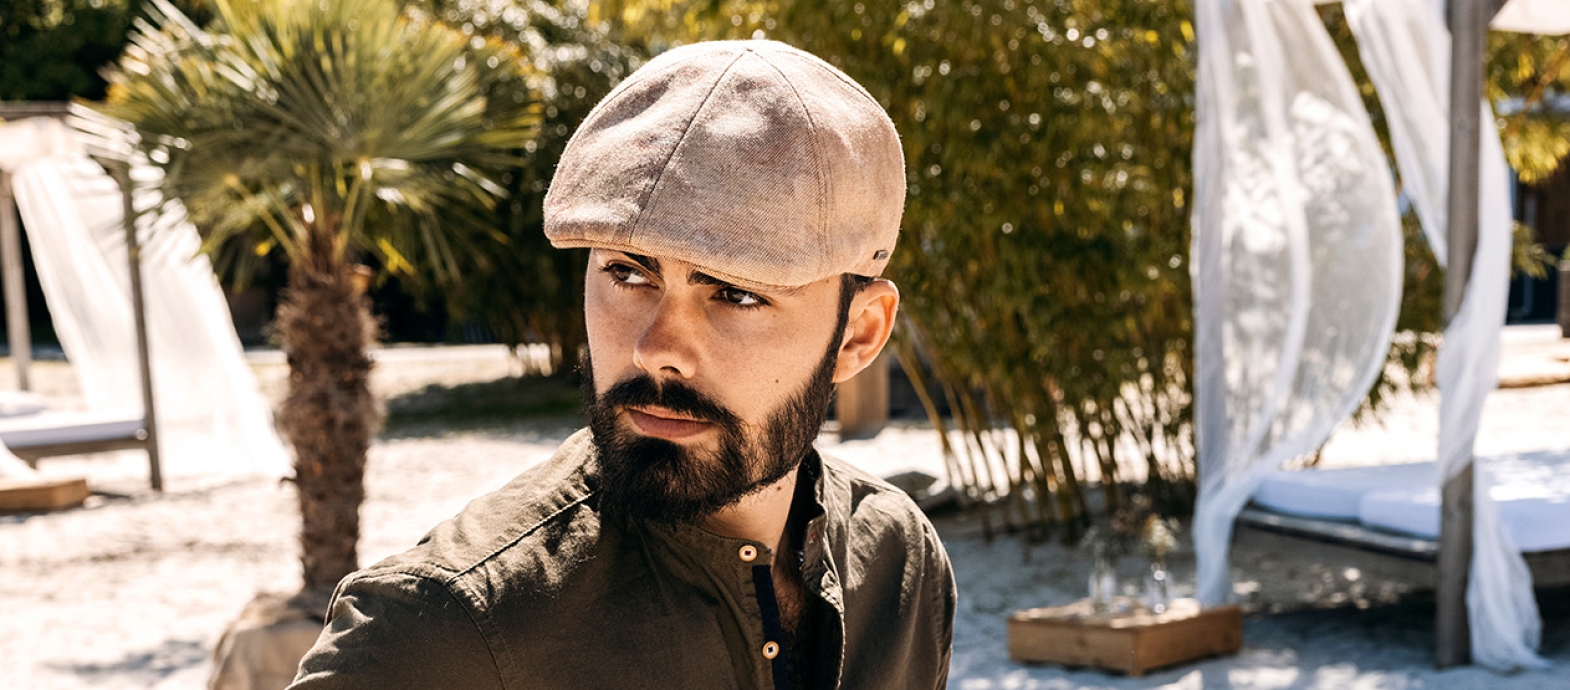 Stetson - summer caps and hats with UV 40+ sun protection 